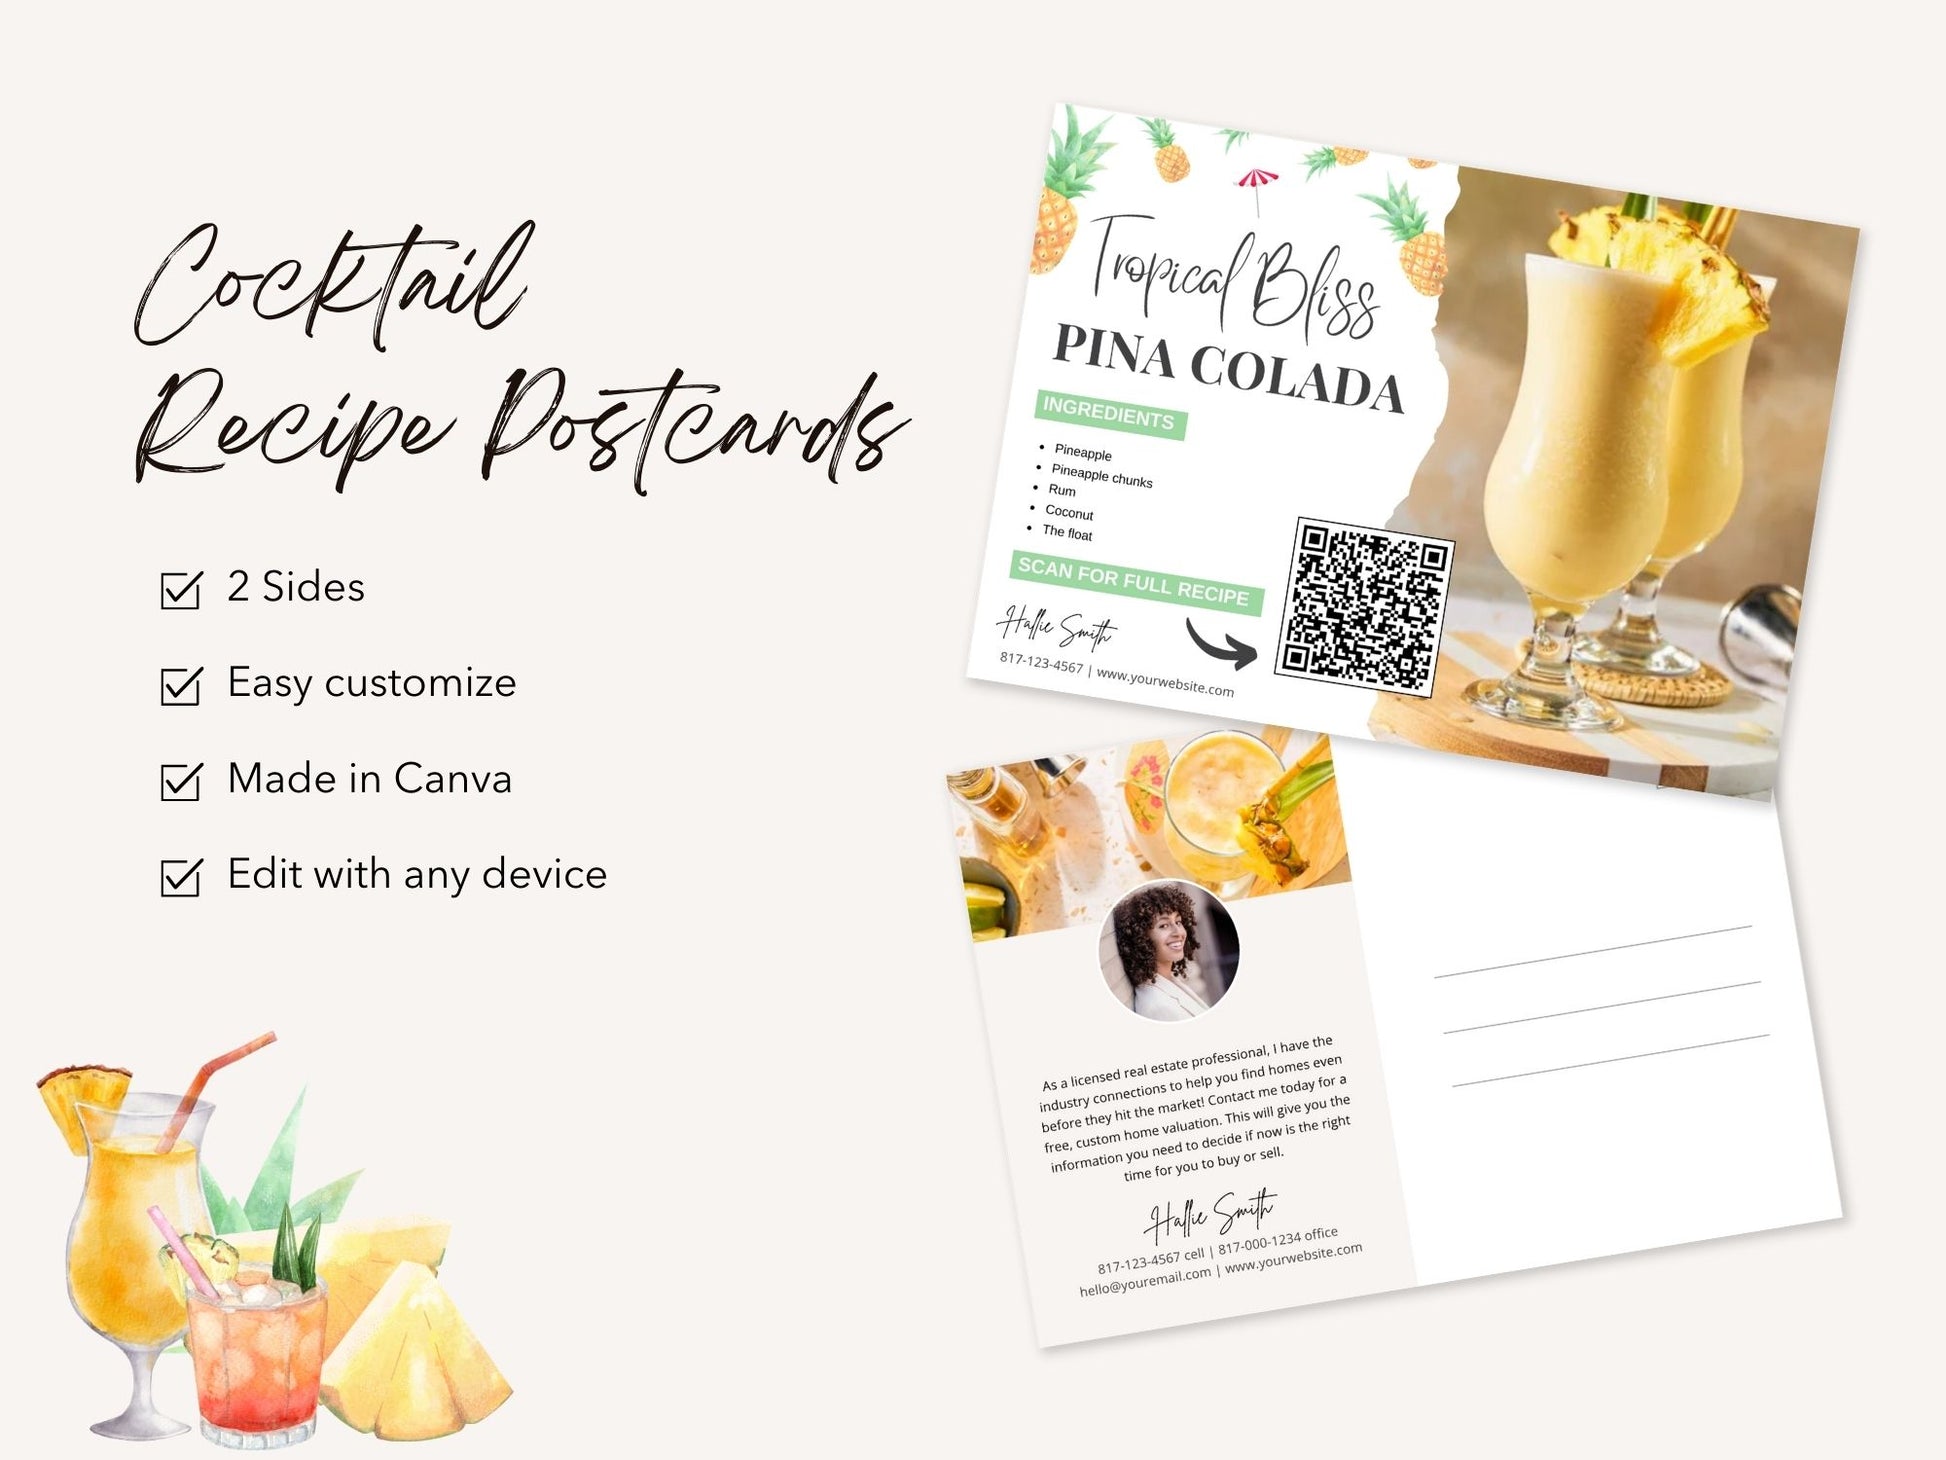 Cocktail Recipe Postcard Bundle - Elevate client connections with Pina Colada, Long Island Iced Tea, and Vodka Strawberry Lemonade recipes. Add a refreshing twist to real estate marketing with delightful cocktail recipe postcards.